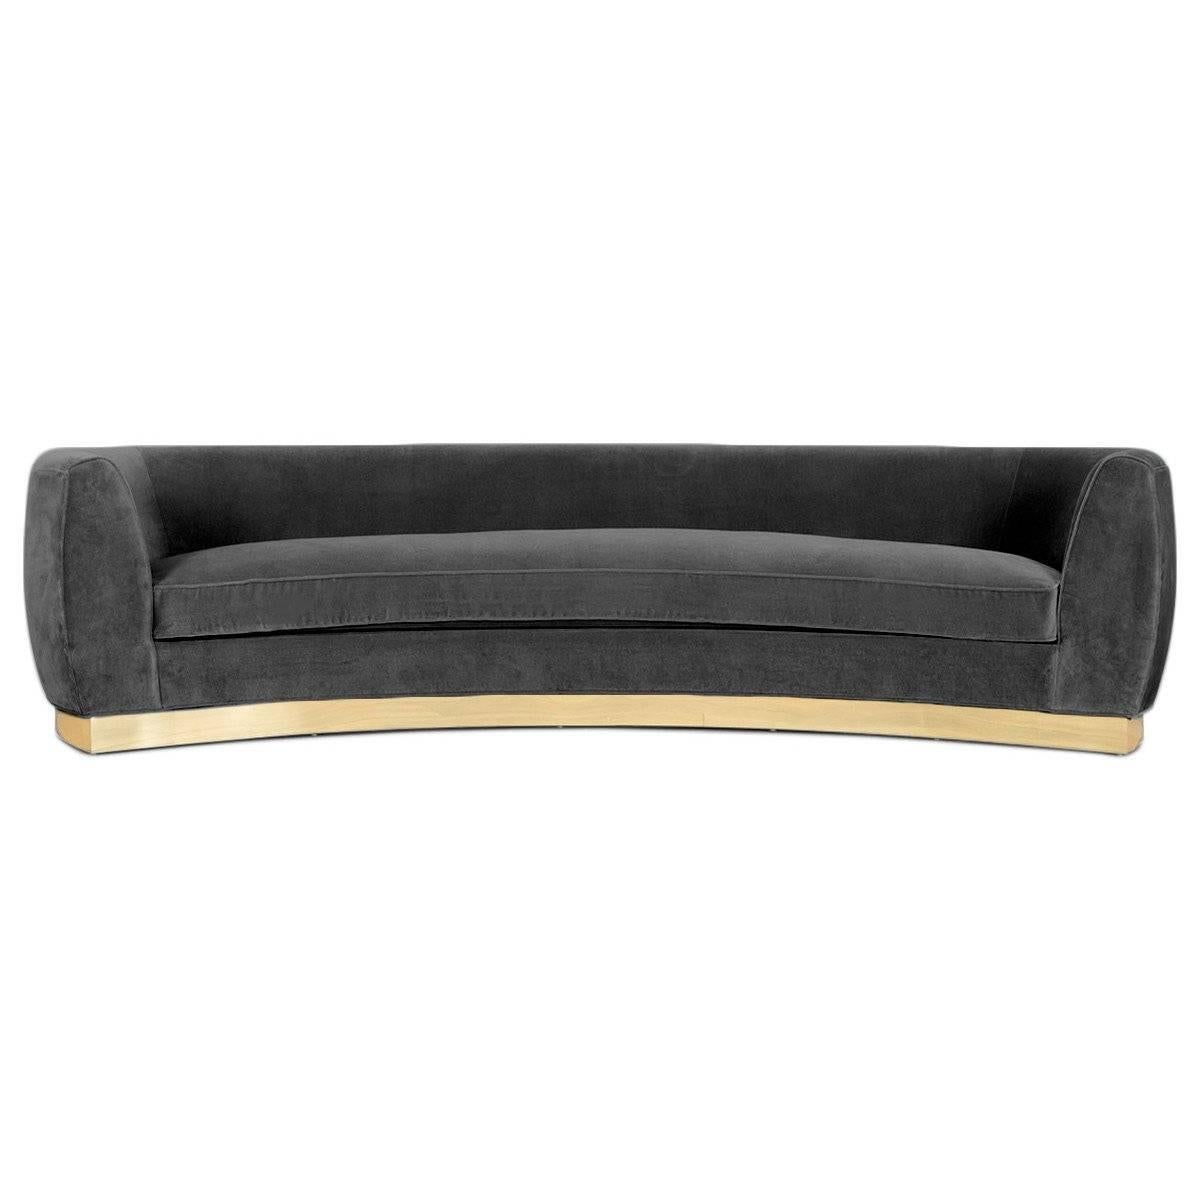 Art Deco Style St. Germain Curved Sofa in Velvet with Brass Toe-kick Base - 9 ft For Sale 10